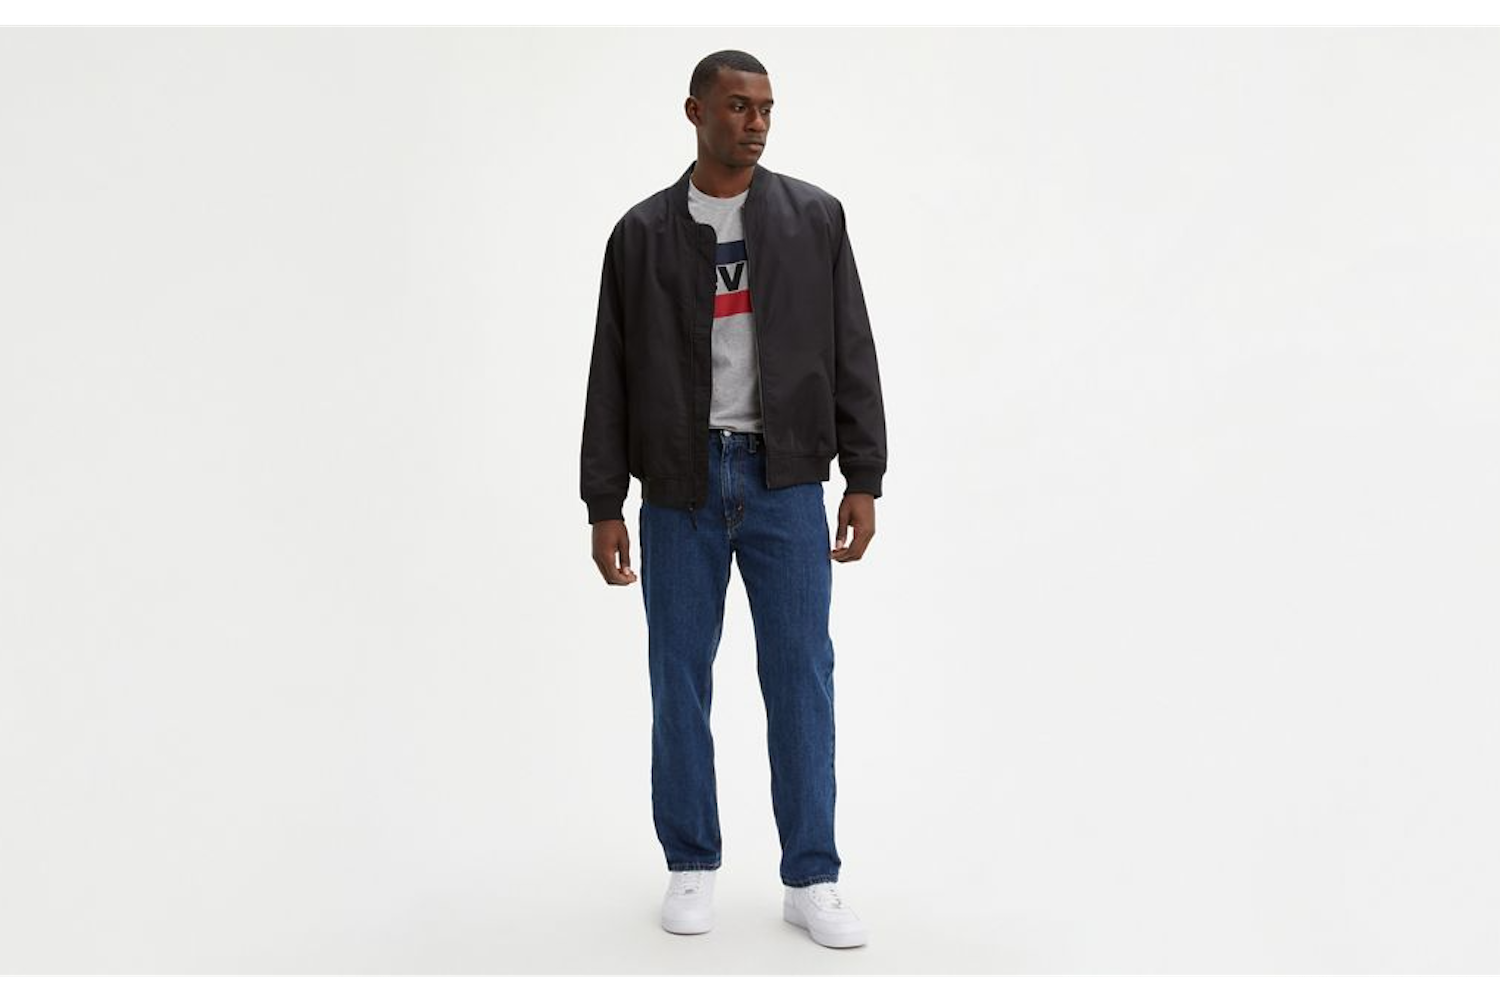 Levi's Jeans Style Numbers Explained, From 501 to 569 - InsideHook